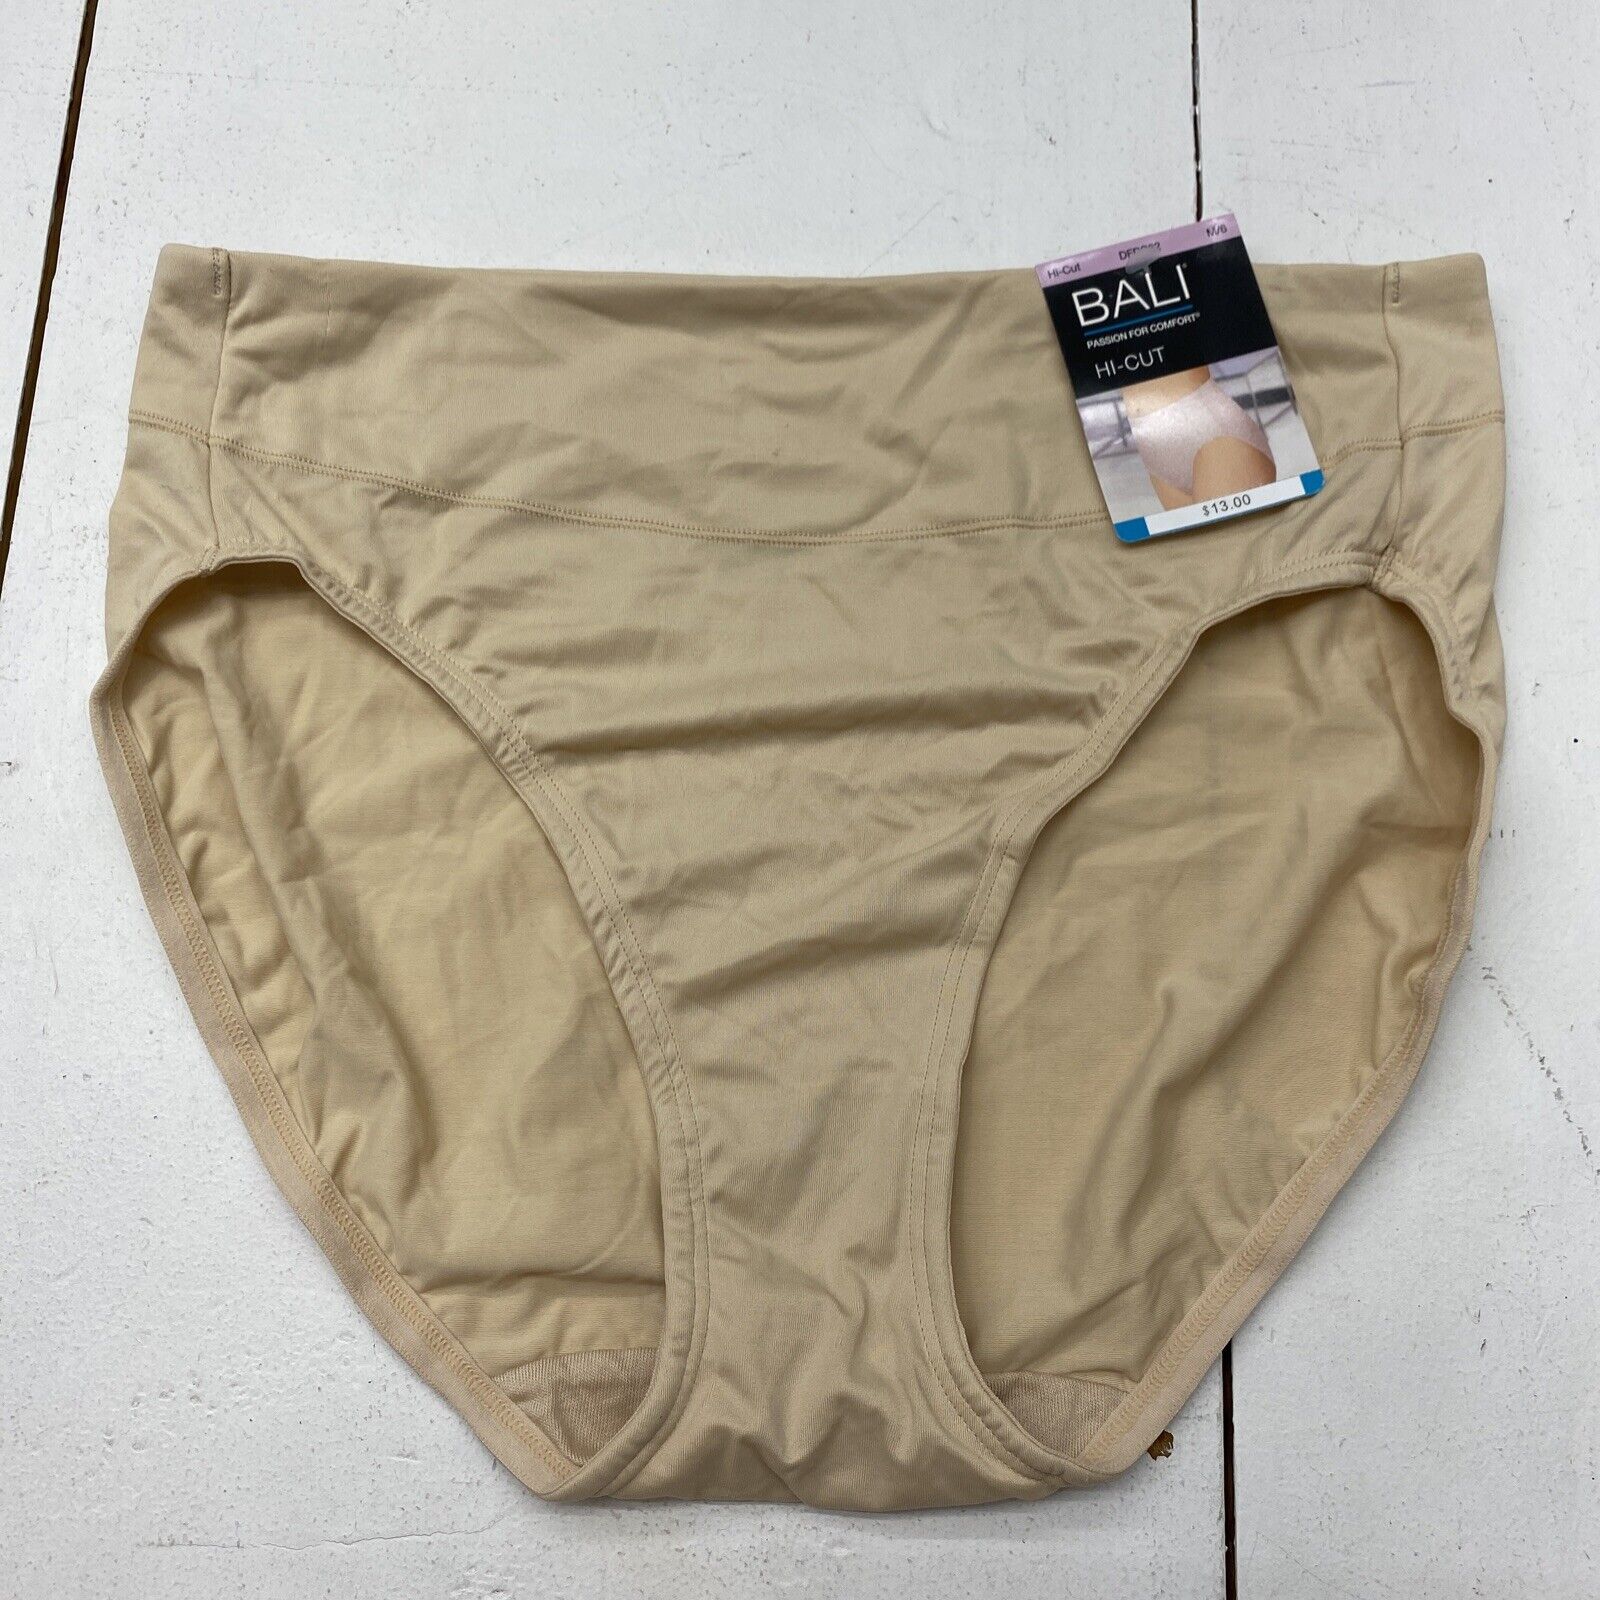 Bali Passion for Comfort Hi-Cut Panty Soft Taupe Womens Size M/6